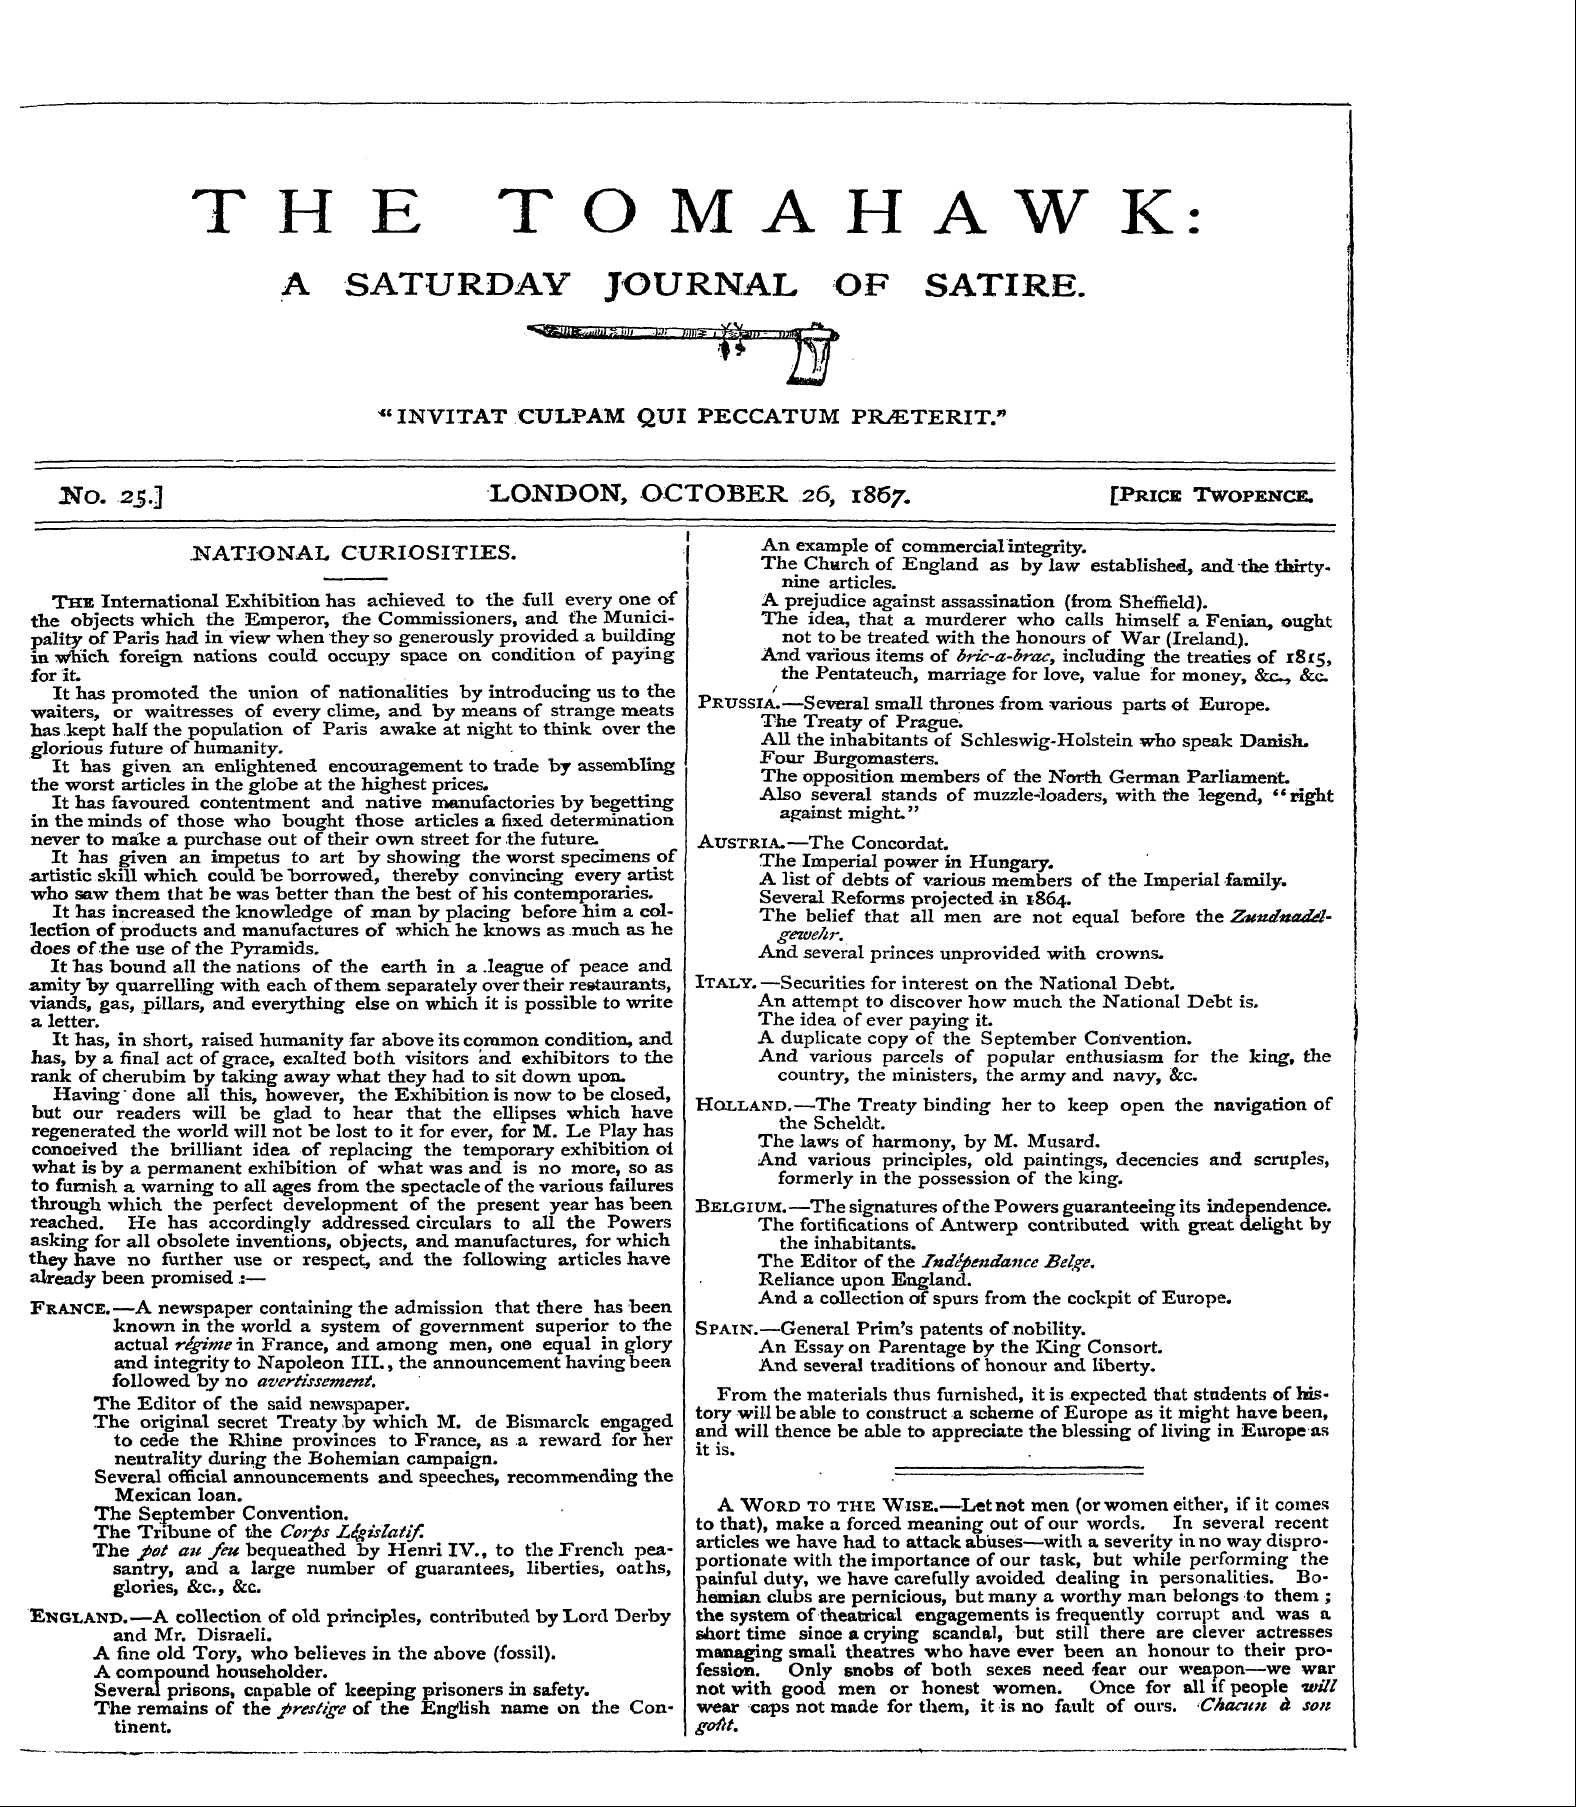 Tomahawk (1867-1870): jS F Y, 1st edition - To A That Word ), Make To A The Forced W...